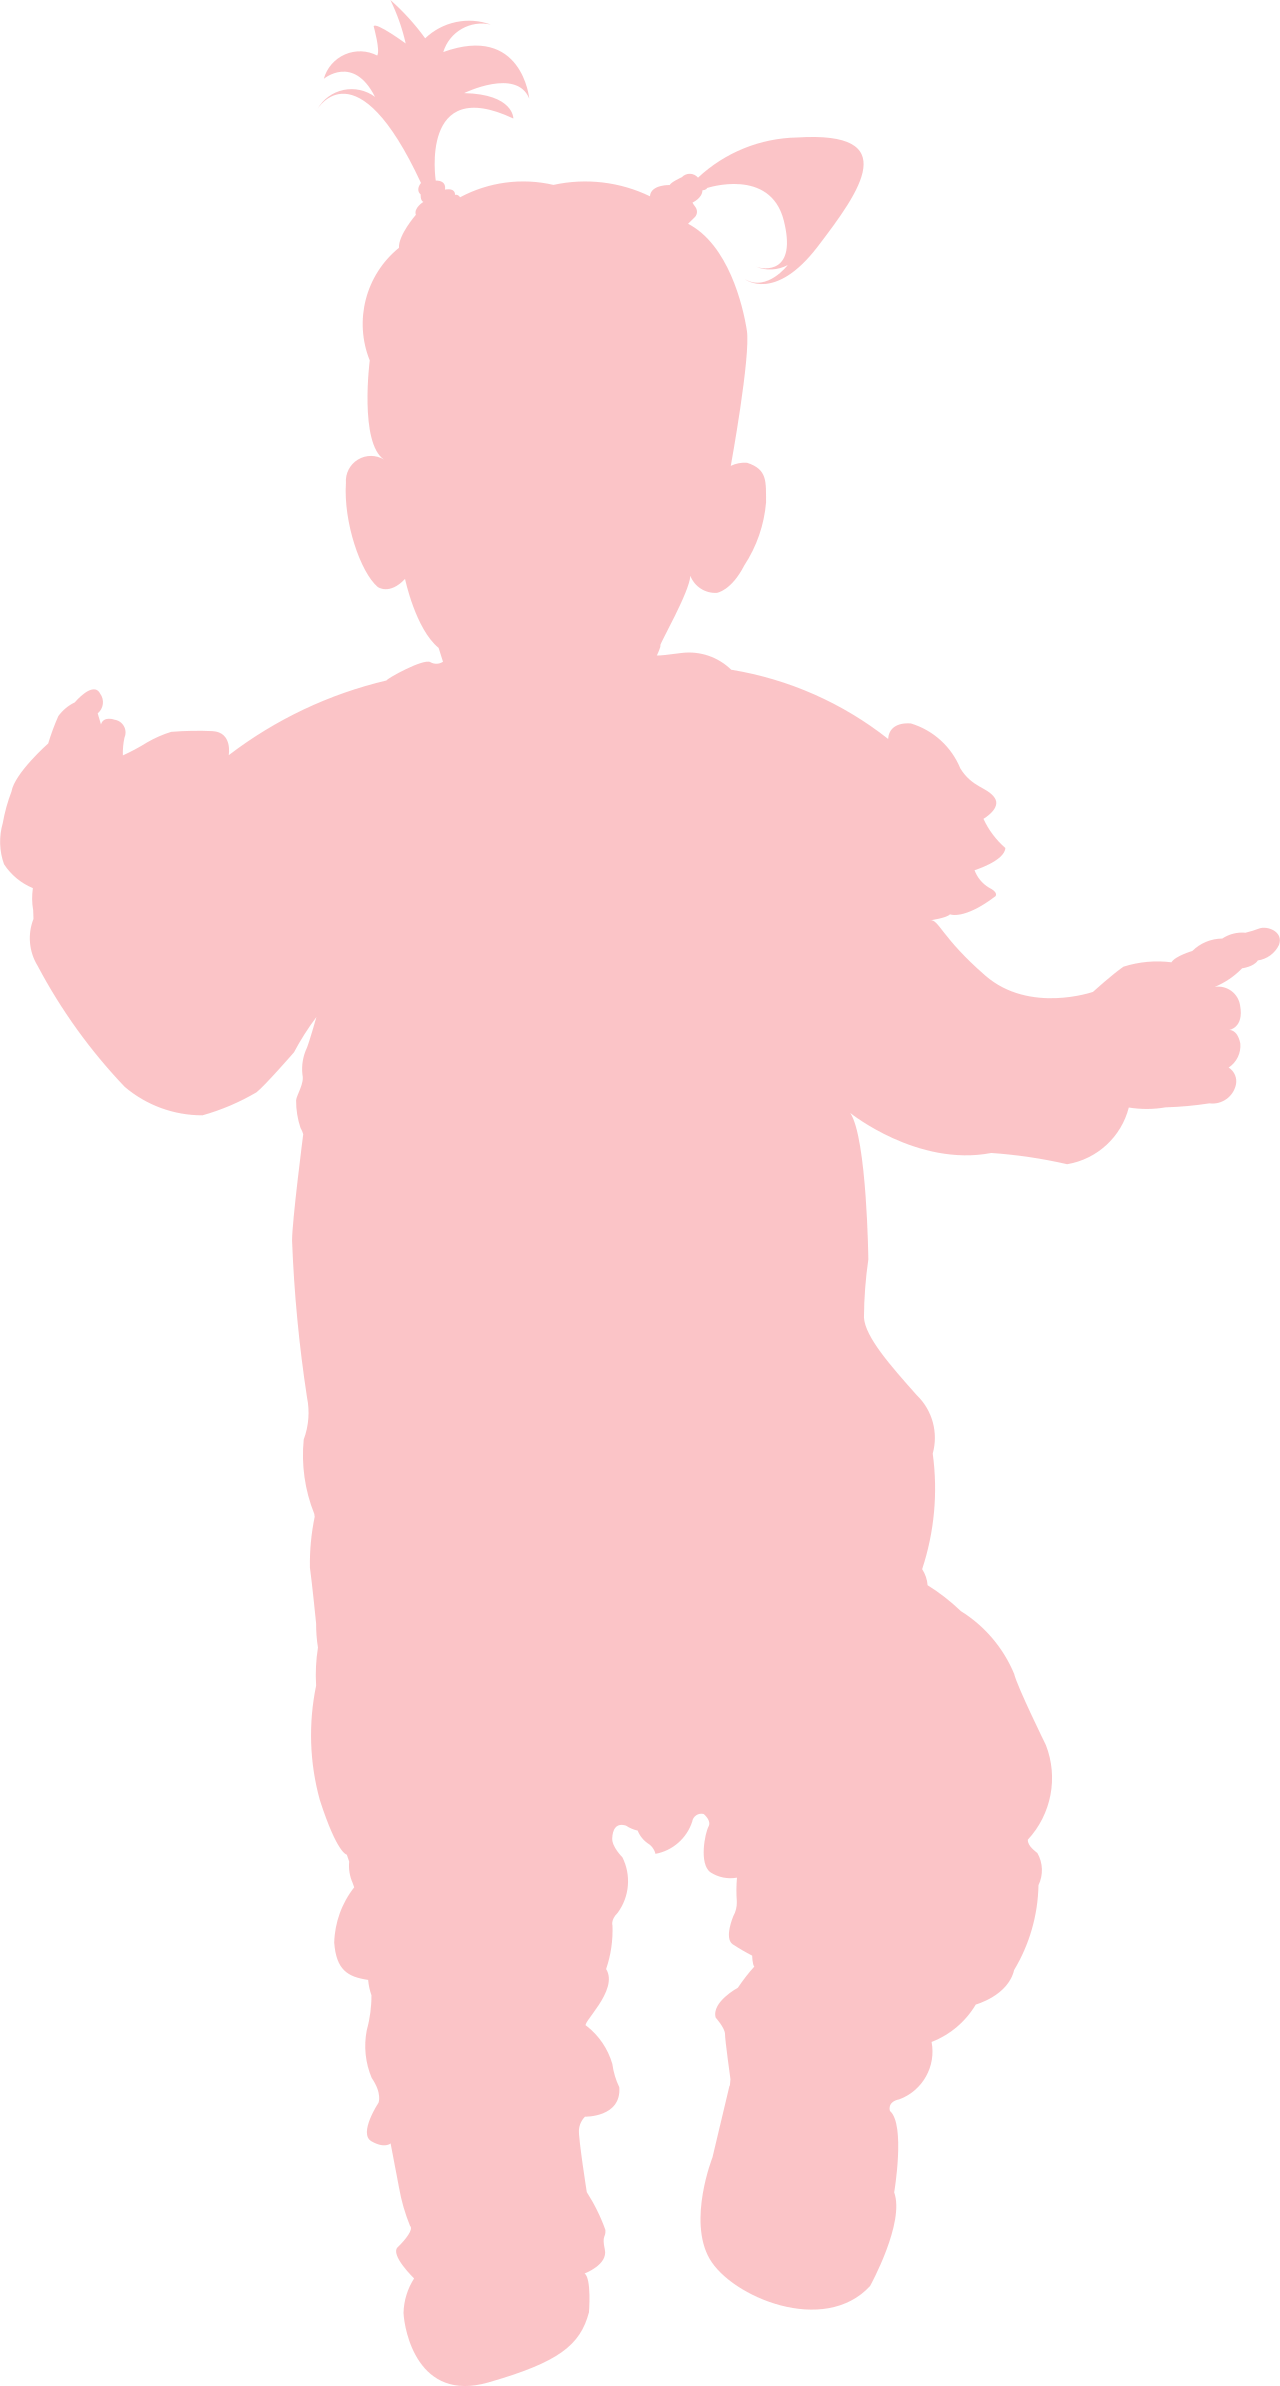 2-4 Years Old silhouette